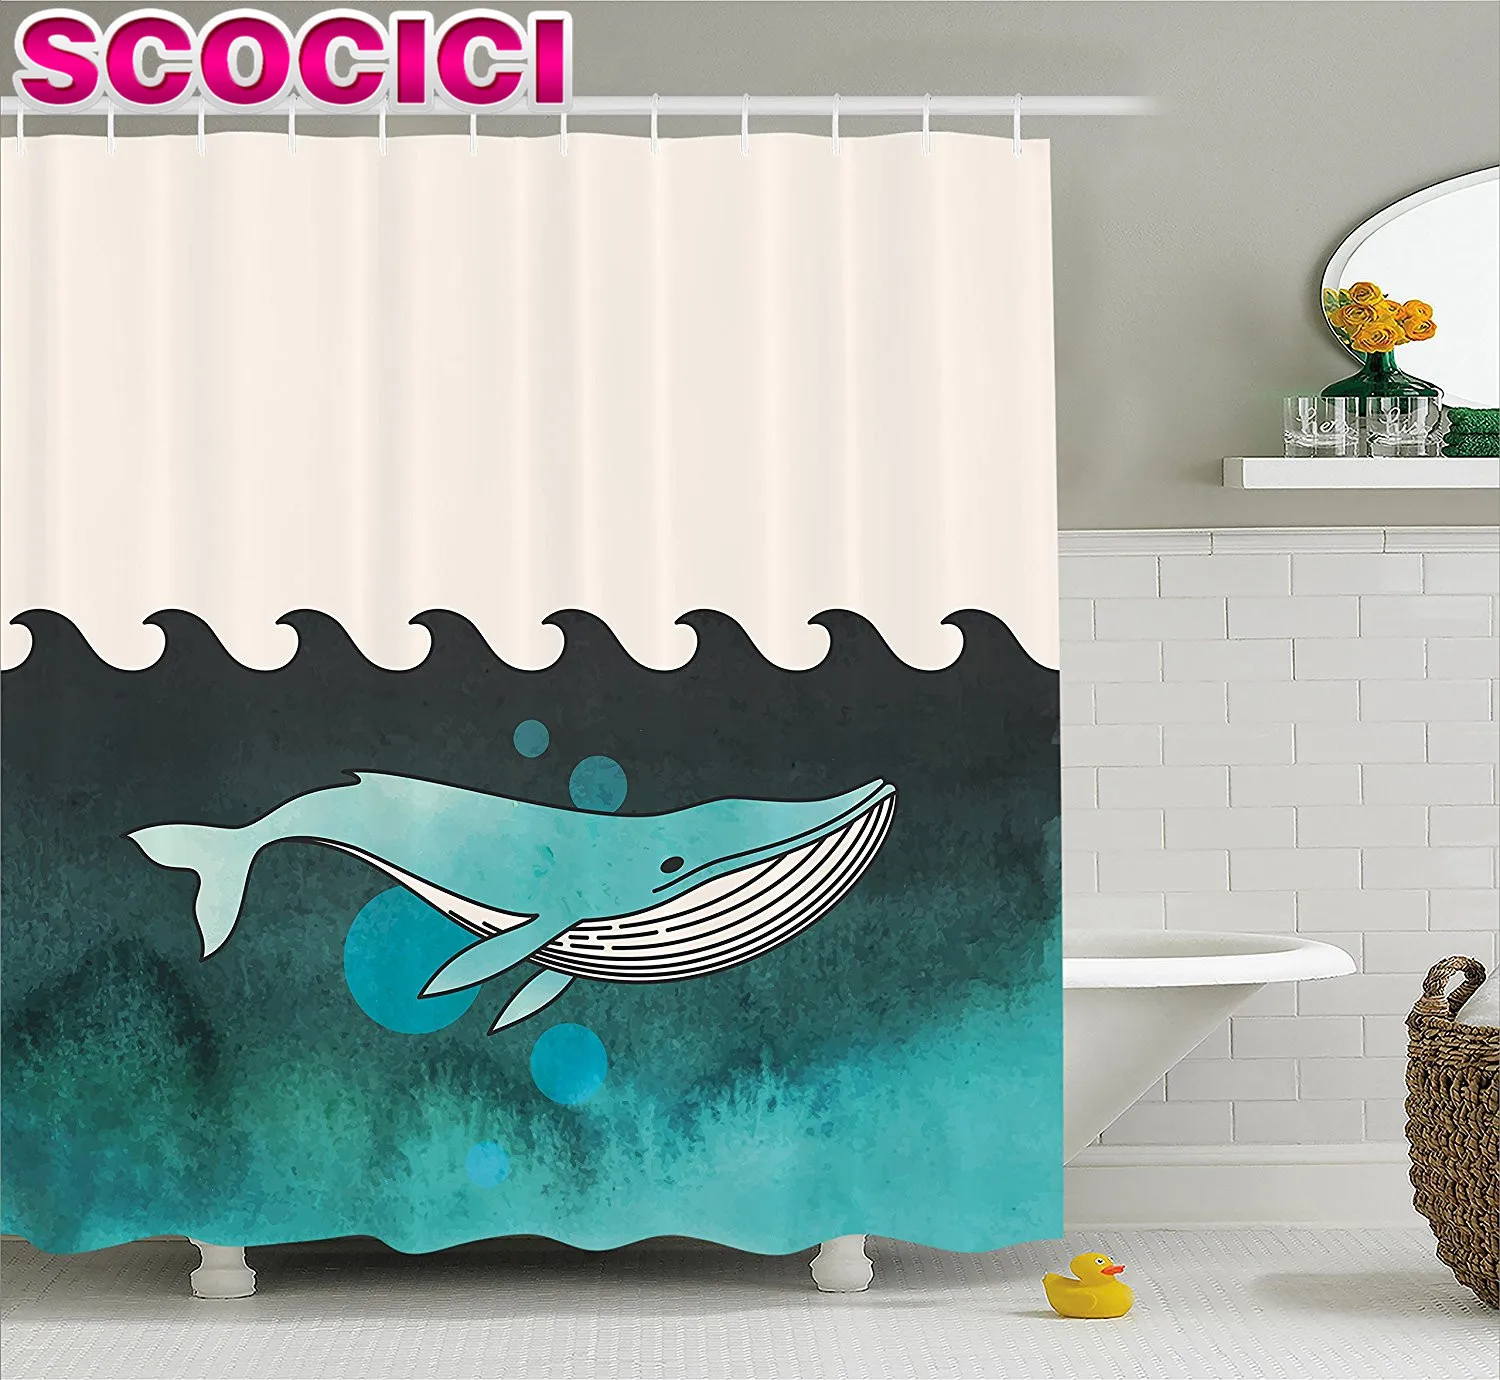 Whale Decor Shower Curtain Huge Whale Swimming Under the Ocean Near an Palm Island with Wooden Skull Fabric Bathroom Decor Set G